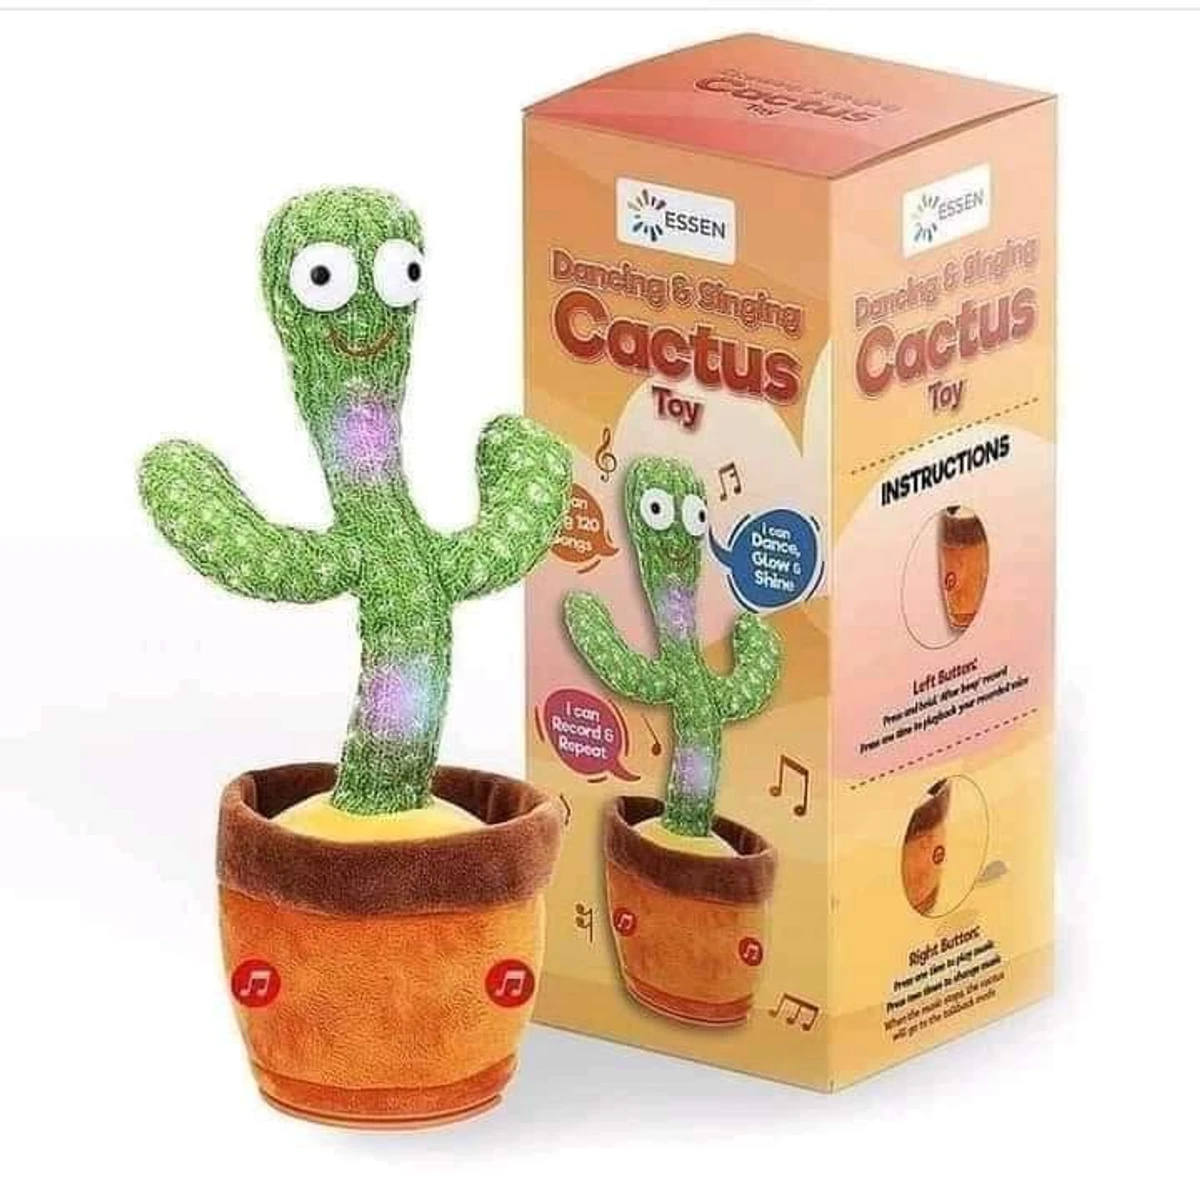 Dancing Cactus Funny Baby Toy